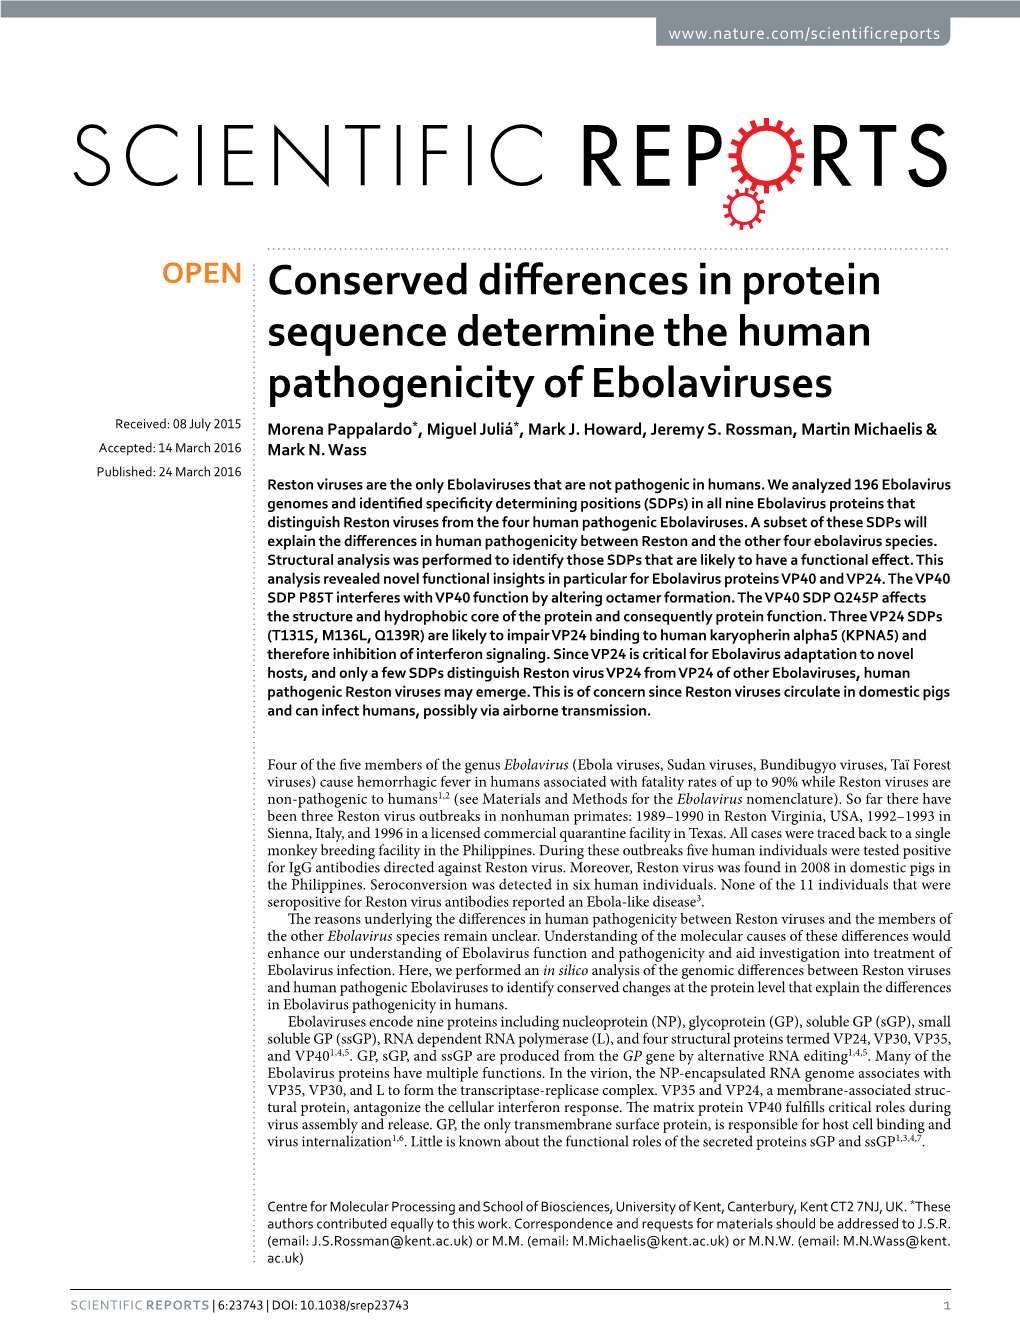 Conserved Differences in Protein Sequence Determine the Human Pathogenicity of Ebolaviruses Received: 08 July 2015 Morena Pappalardo*, Miguel Juliá*, Mark J